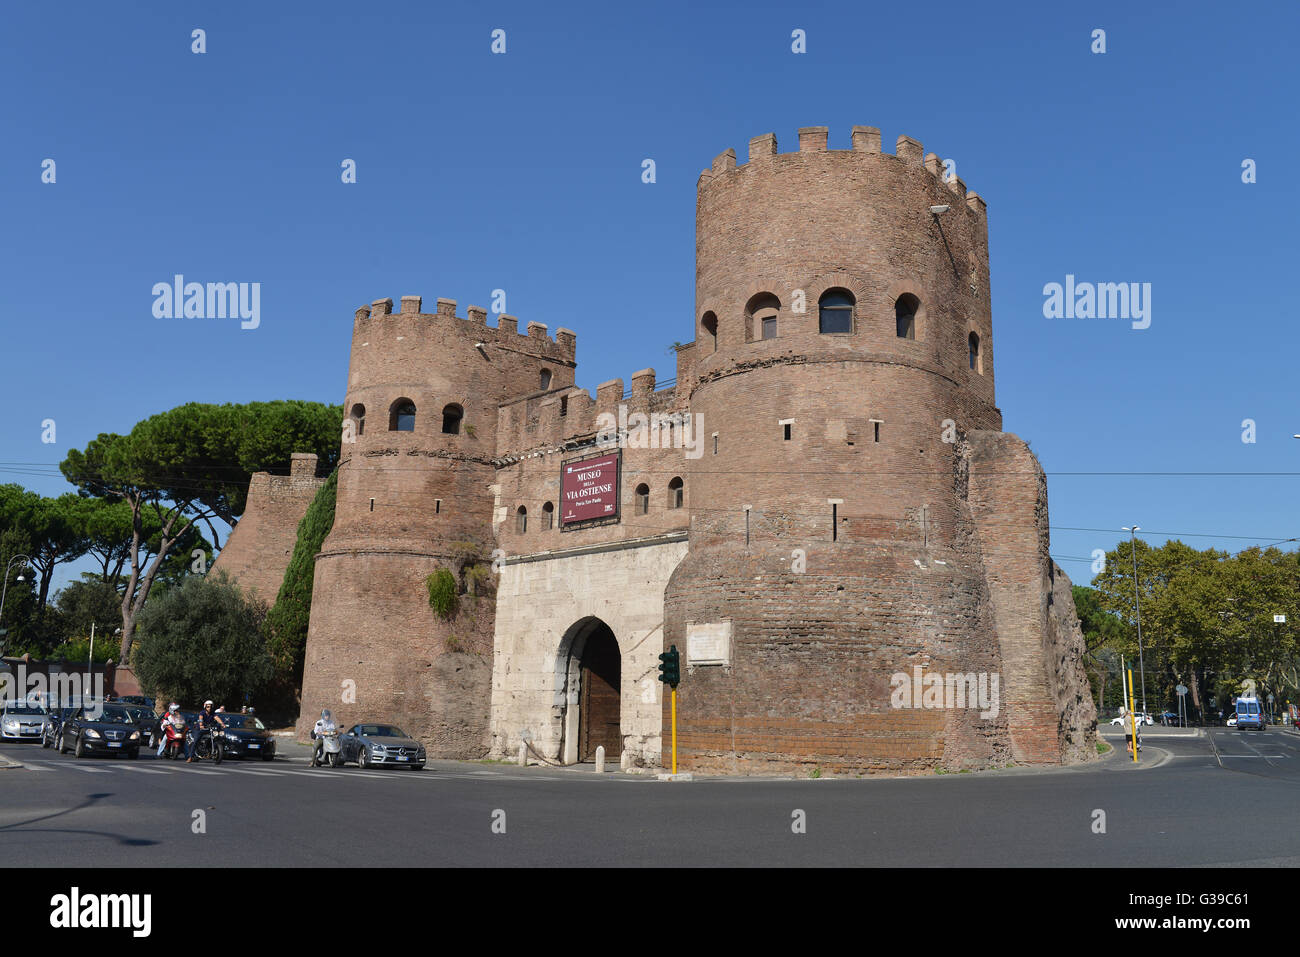 Porta San Paolo, Piazzale Ostiense, Rom, Italie Banque D'Images